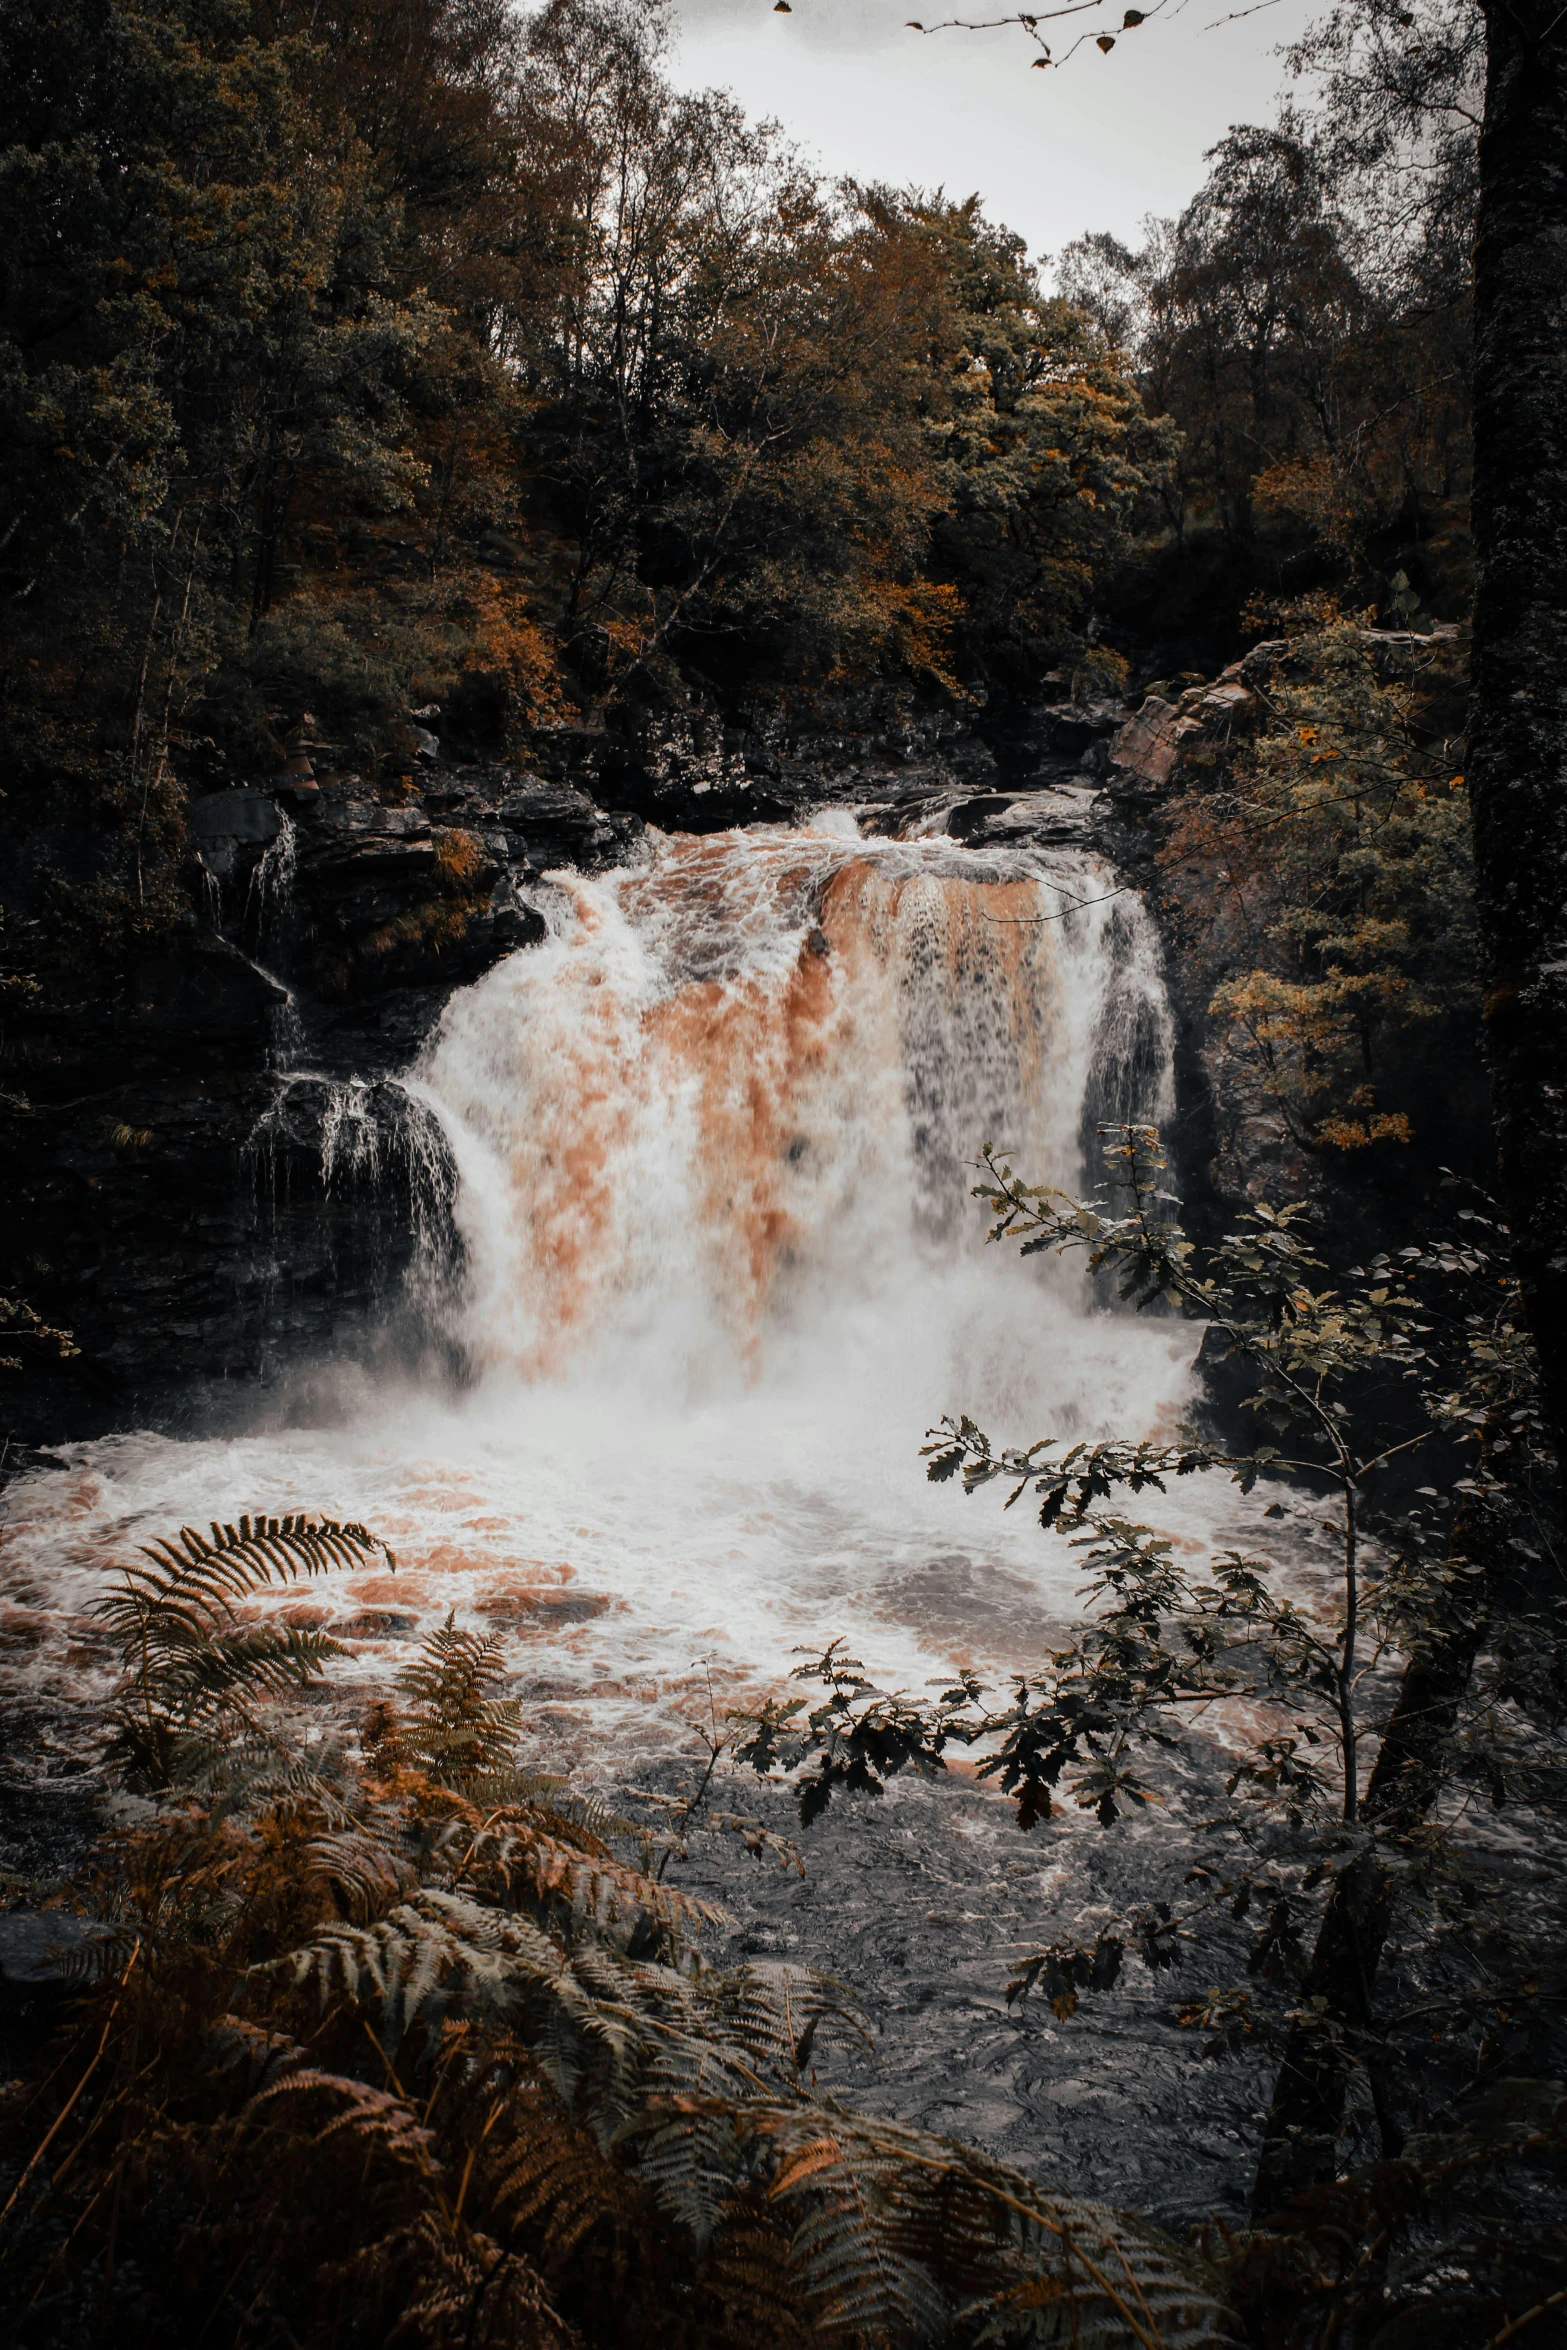 the image is of the fall with a very large waterfall